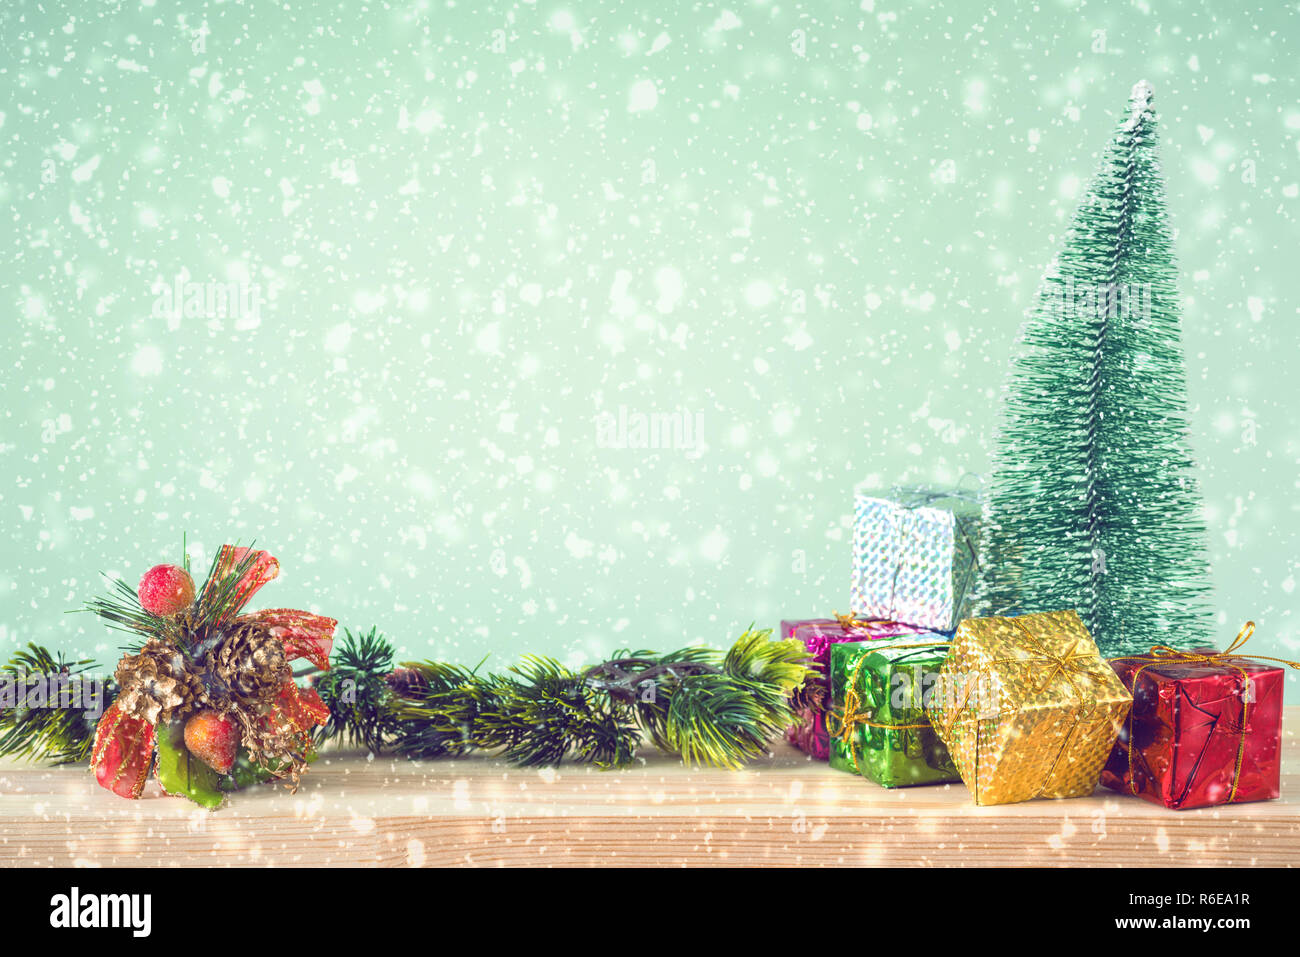 Christmas background. Christmas tree and ornaments lie on a wooden table snowy weather. Space for text. It's snowing. Merry Christmas. New Year's back Stock Photo